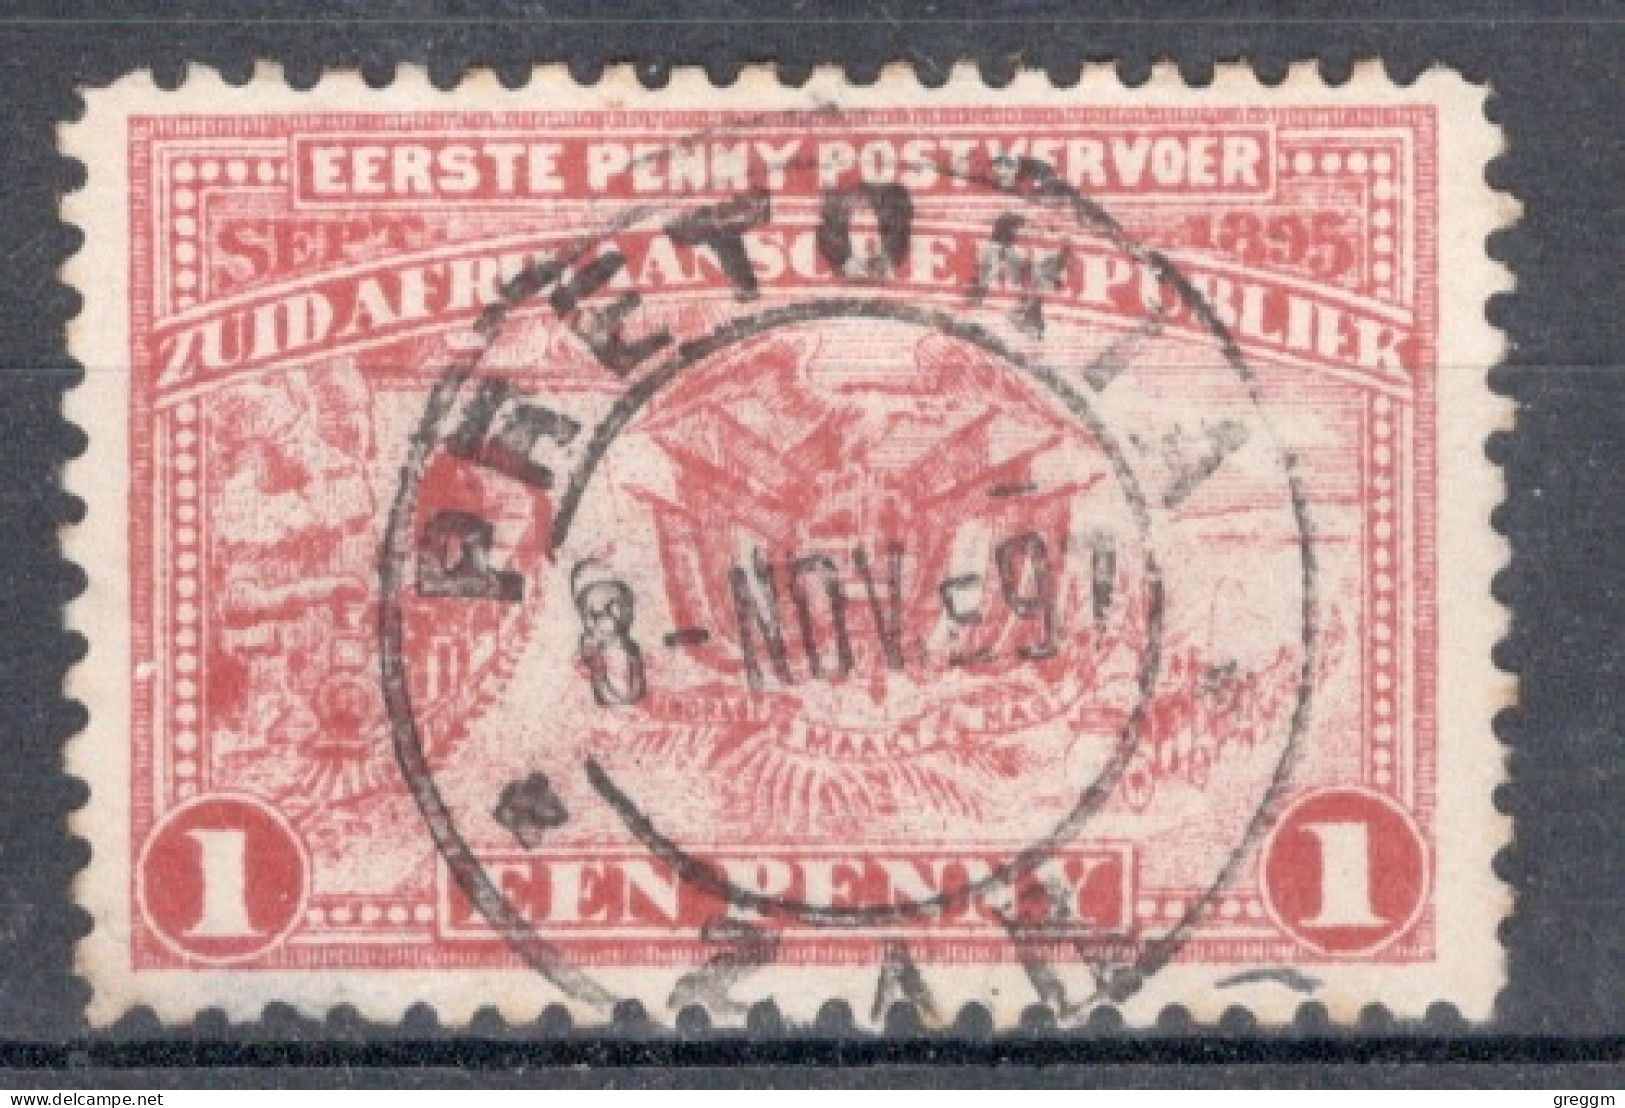 South African Republic 1895 Single 1d Coat Of Arms - Penny Postage In Fine Used - New Republic (1886-1887)